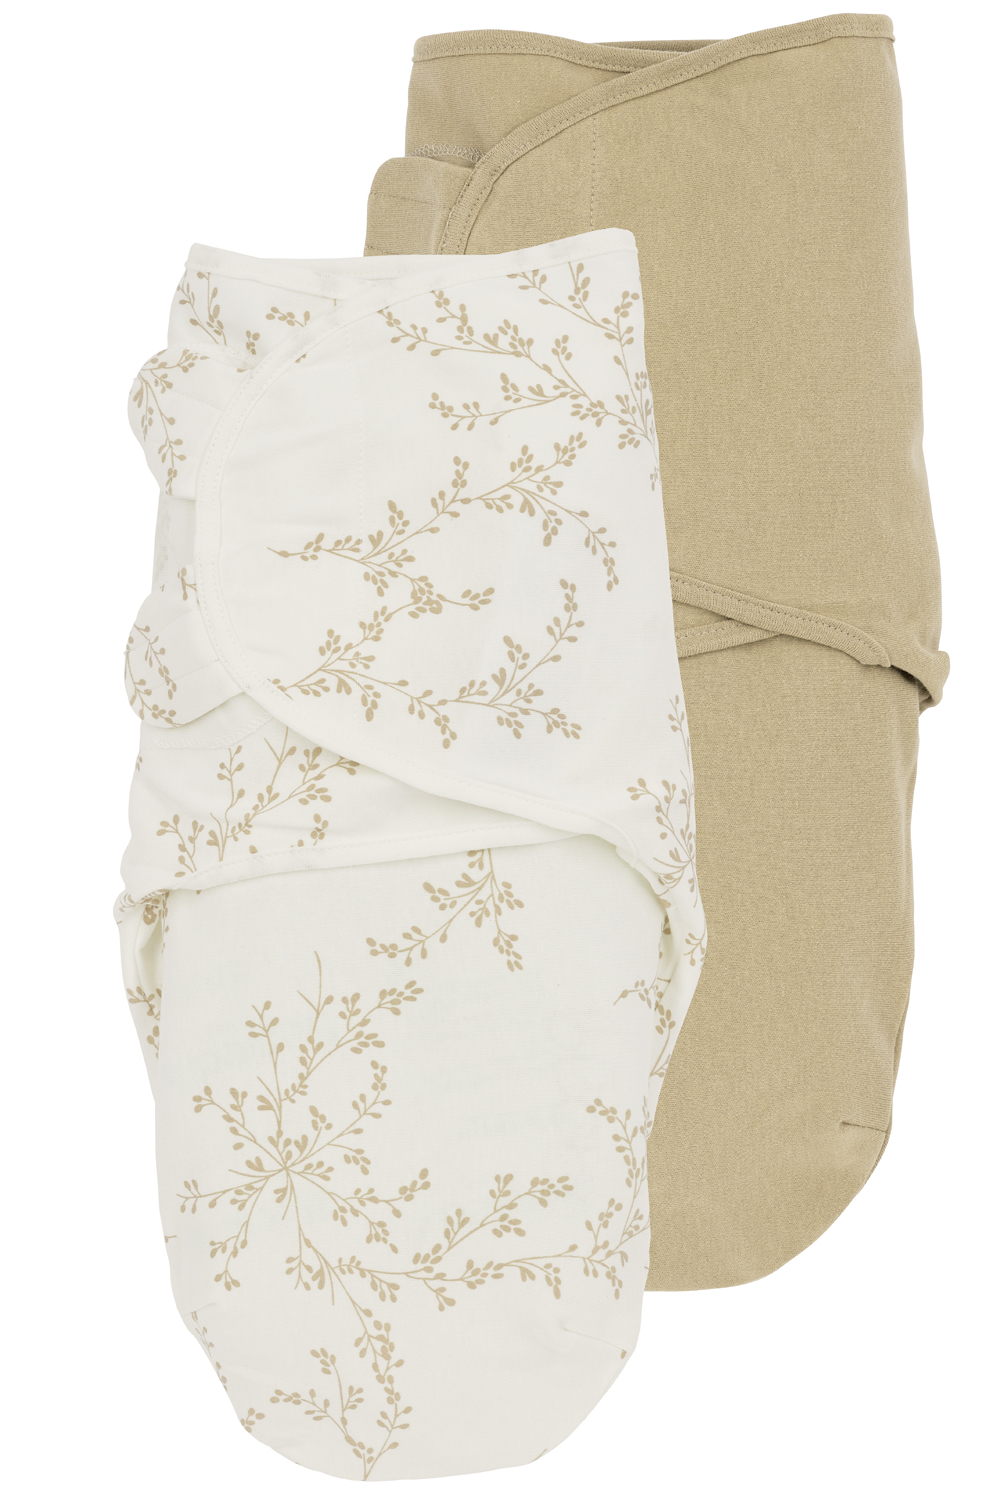 Swaddle 2-pack Branches/Uni - sand - 0-3 Months